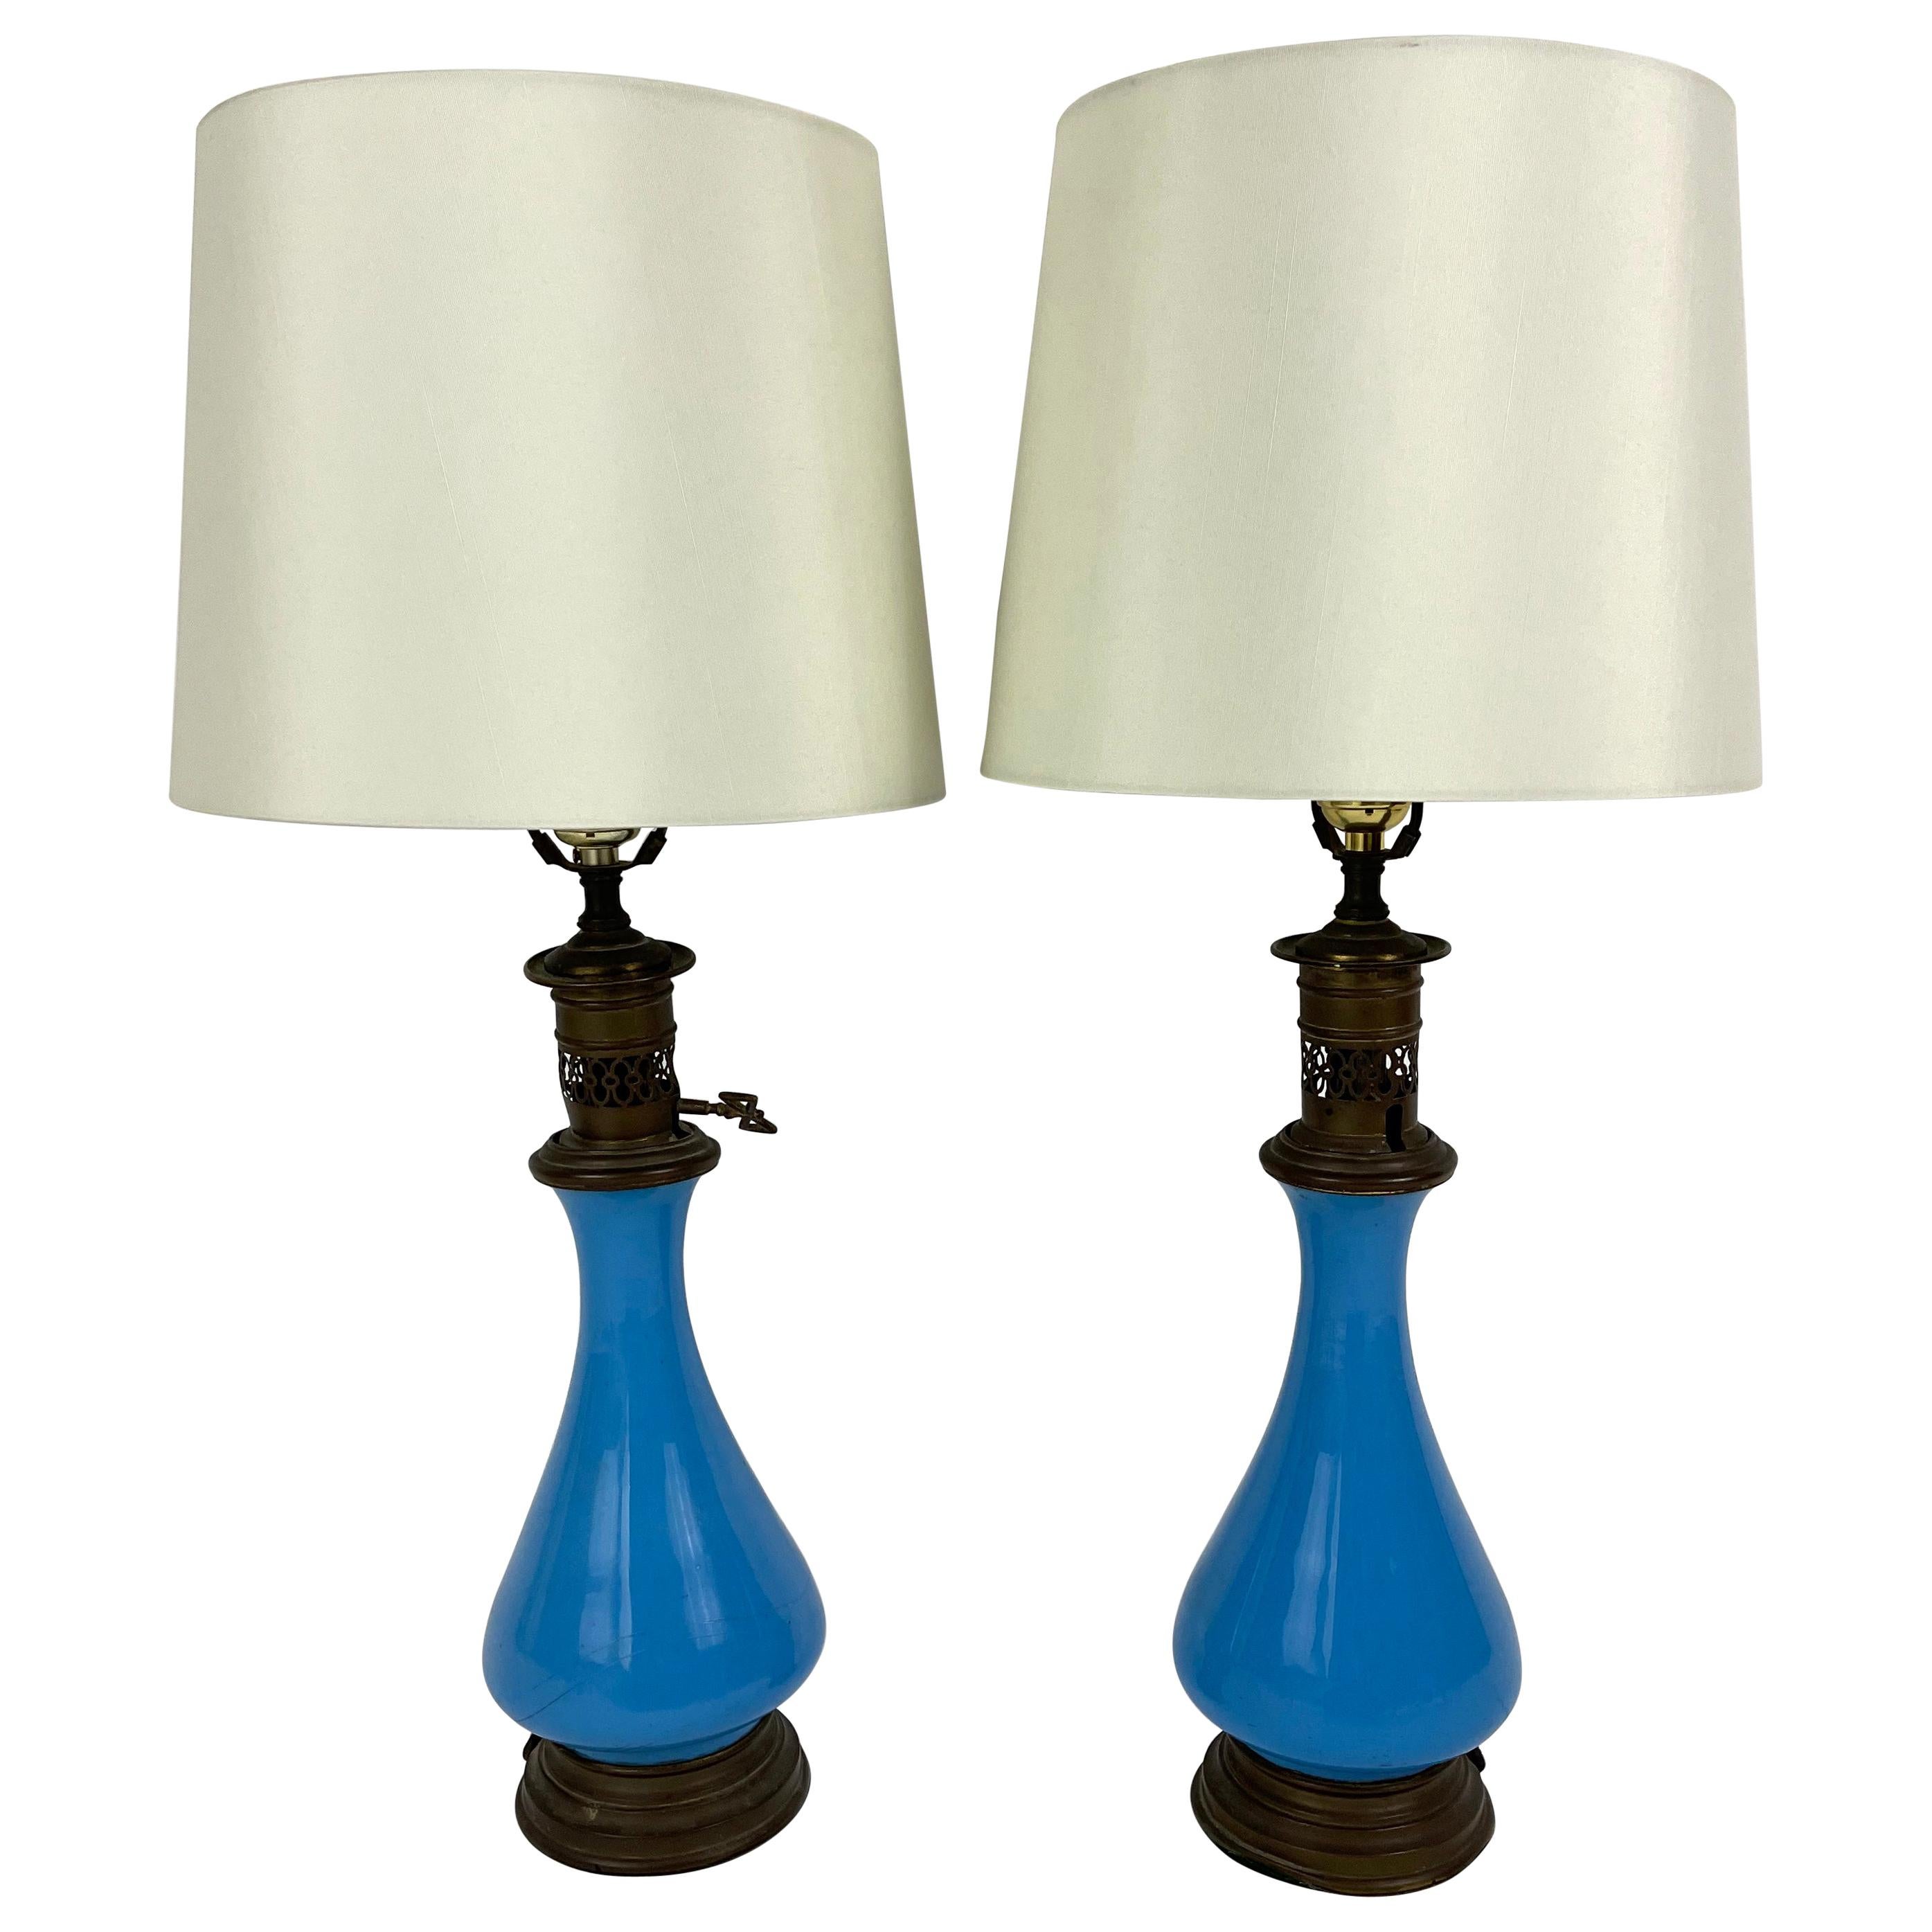 Pair of 19th Century French Blue Opaline Glass Lamps